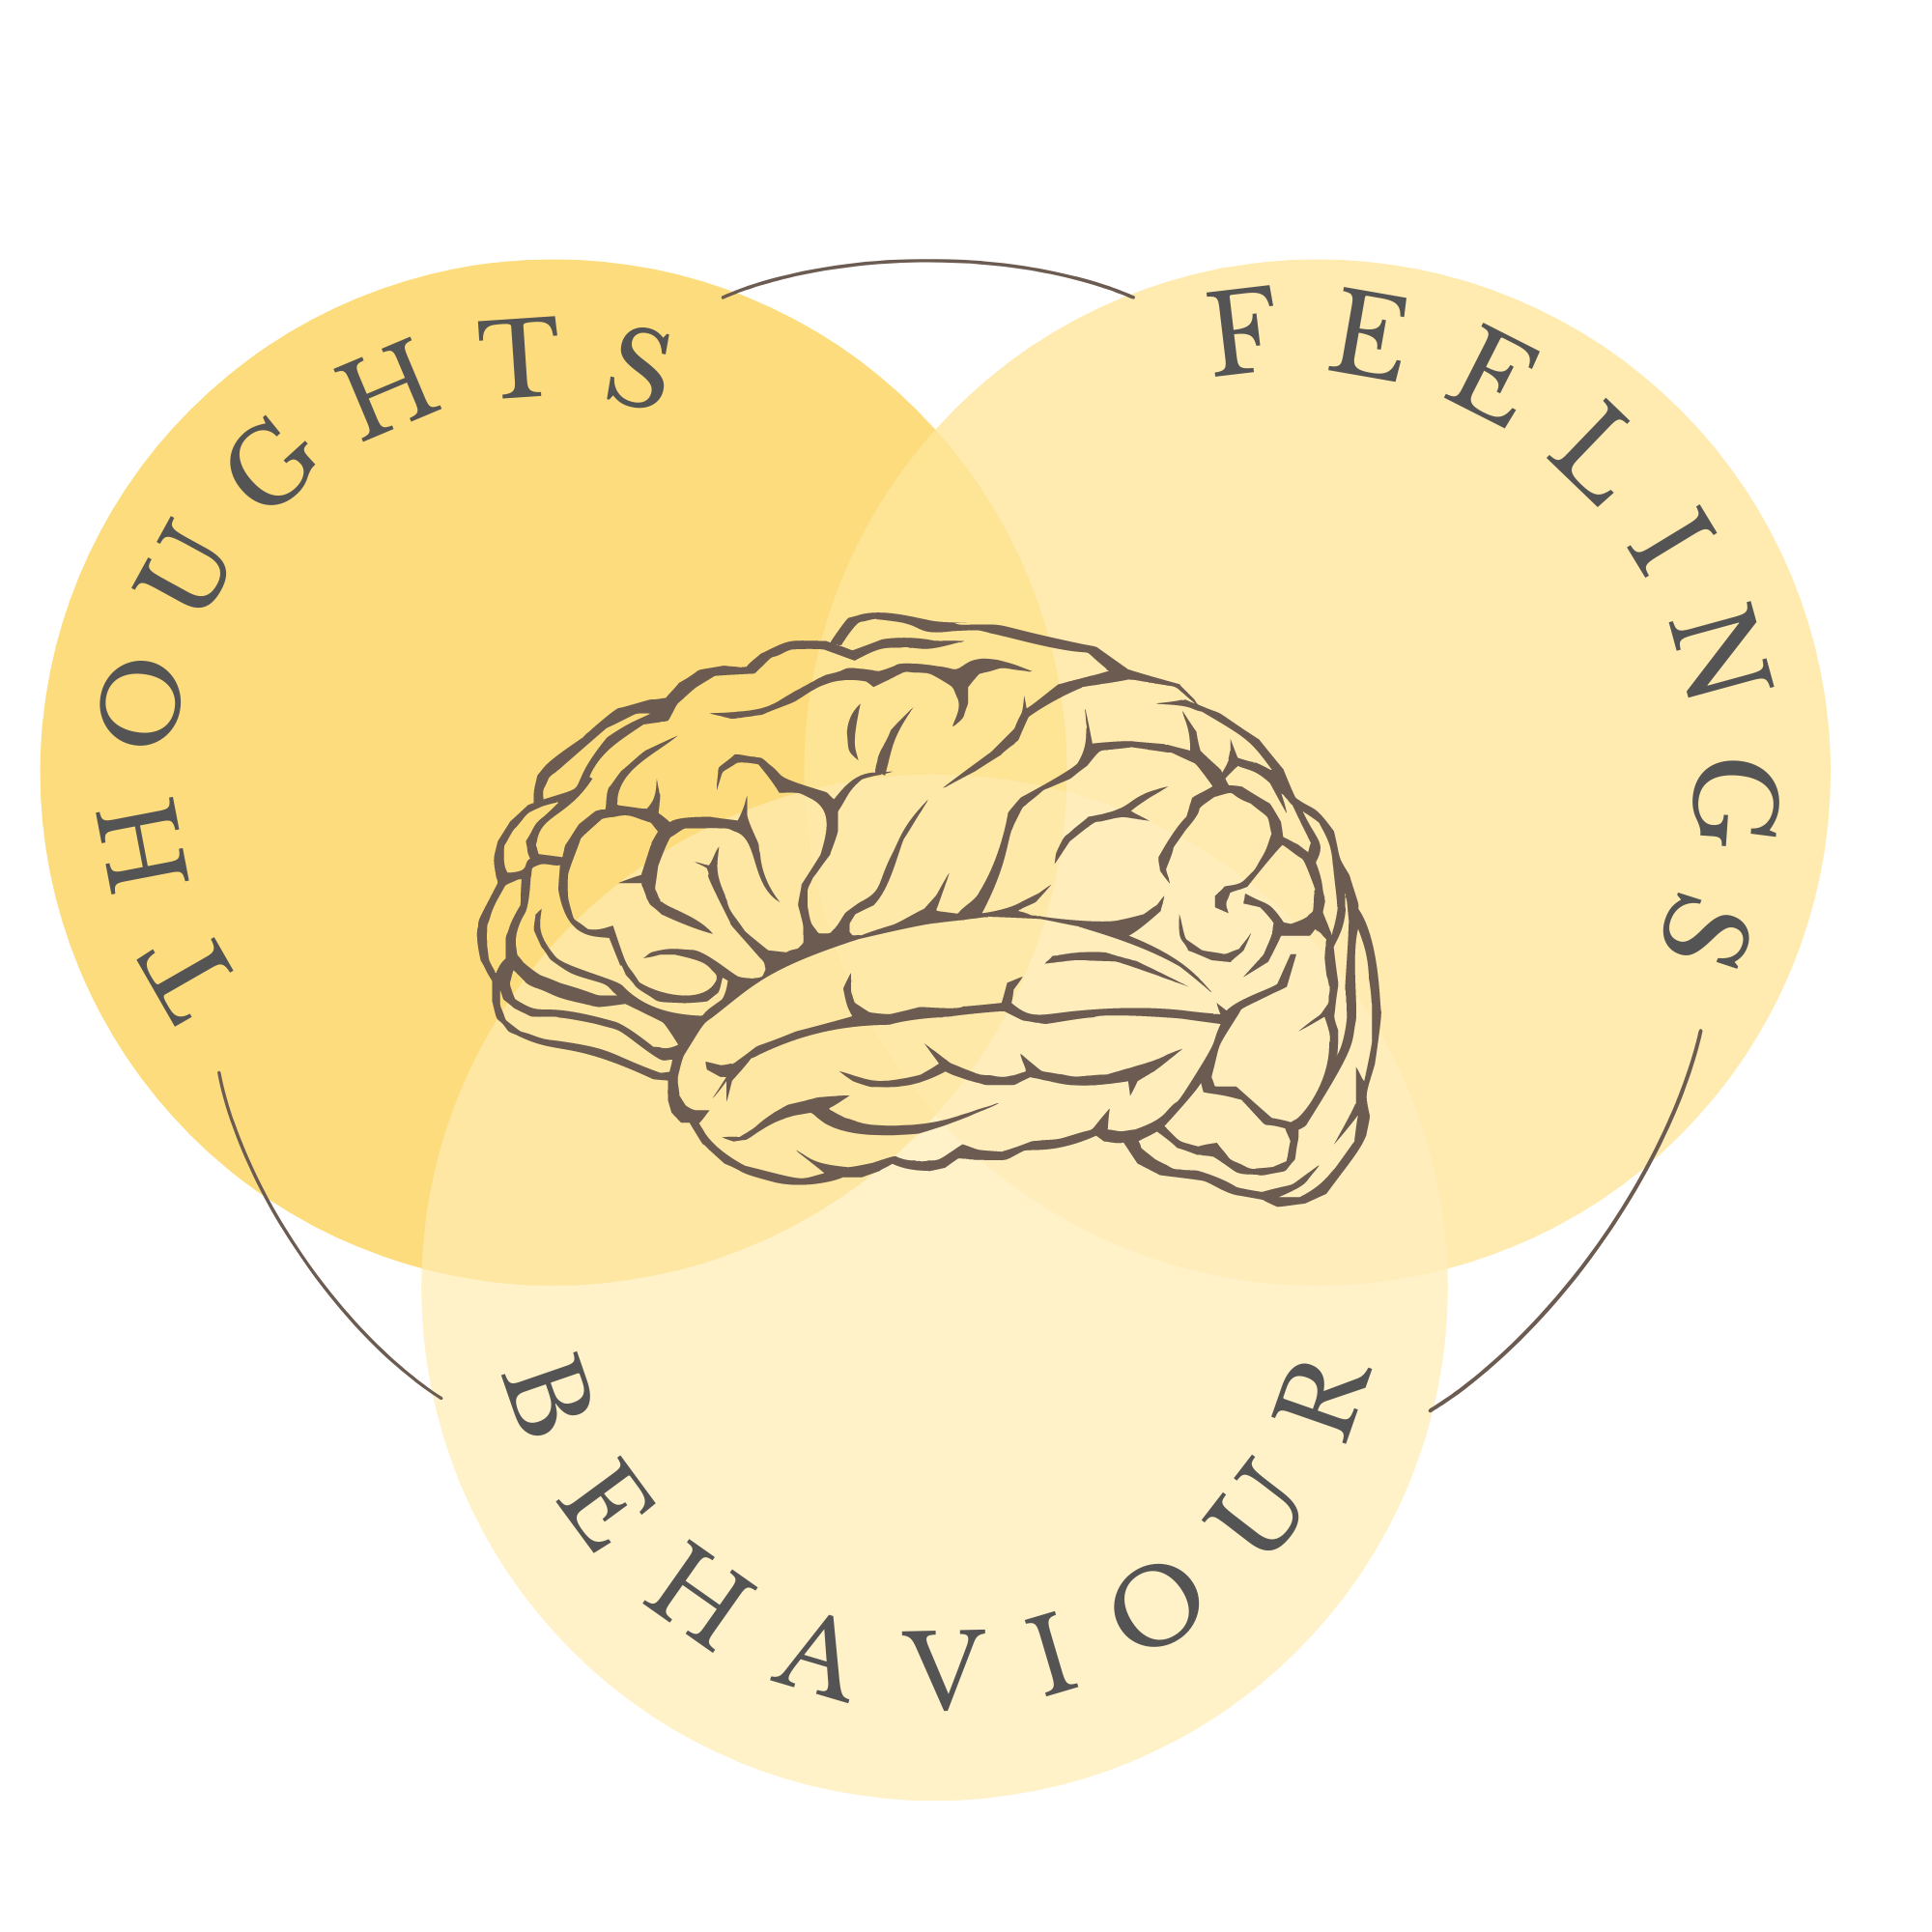 Cognitive behavioural therapy, CBT